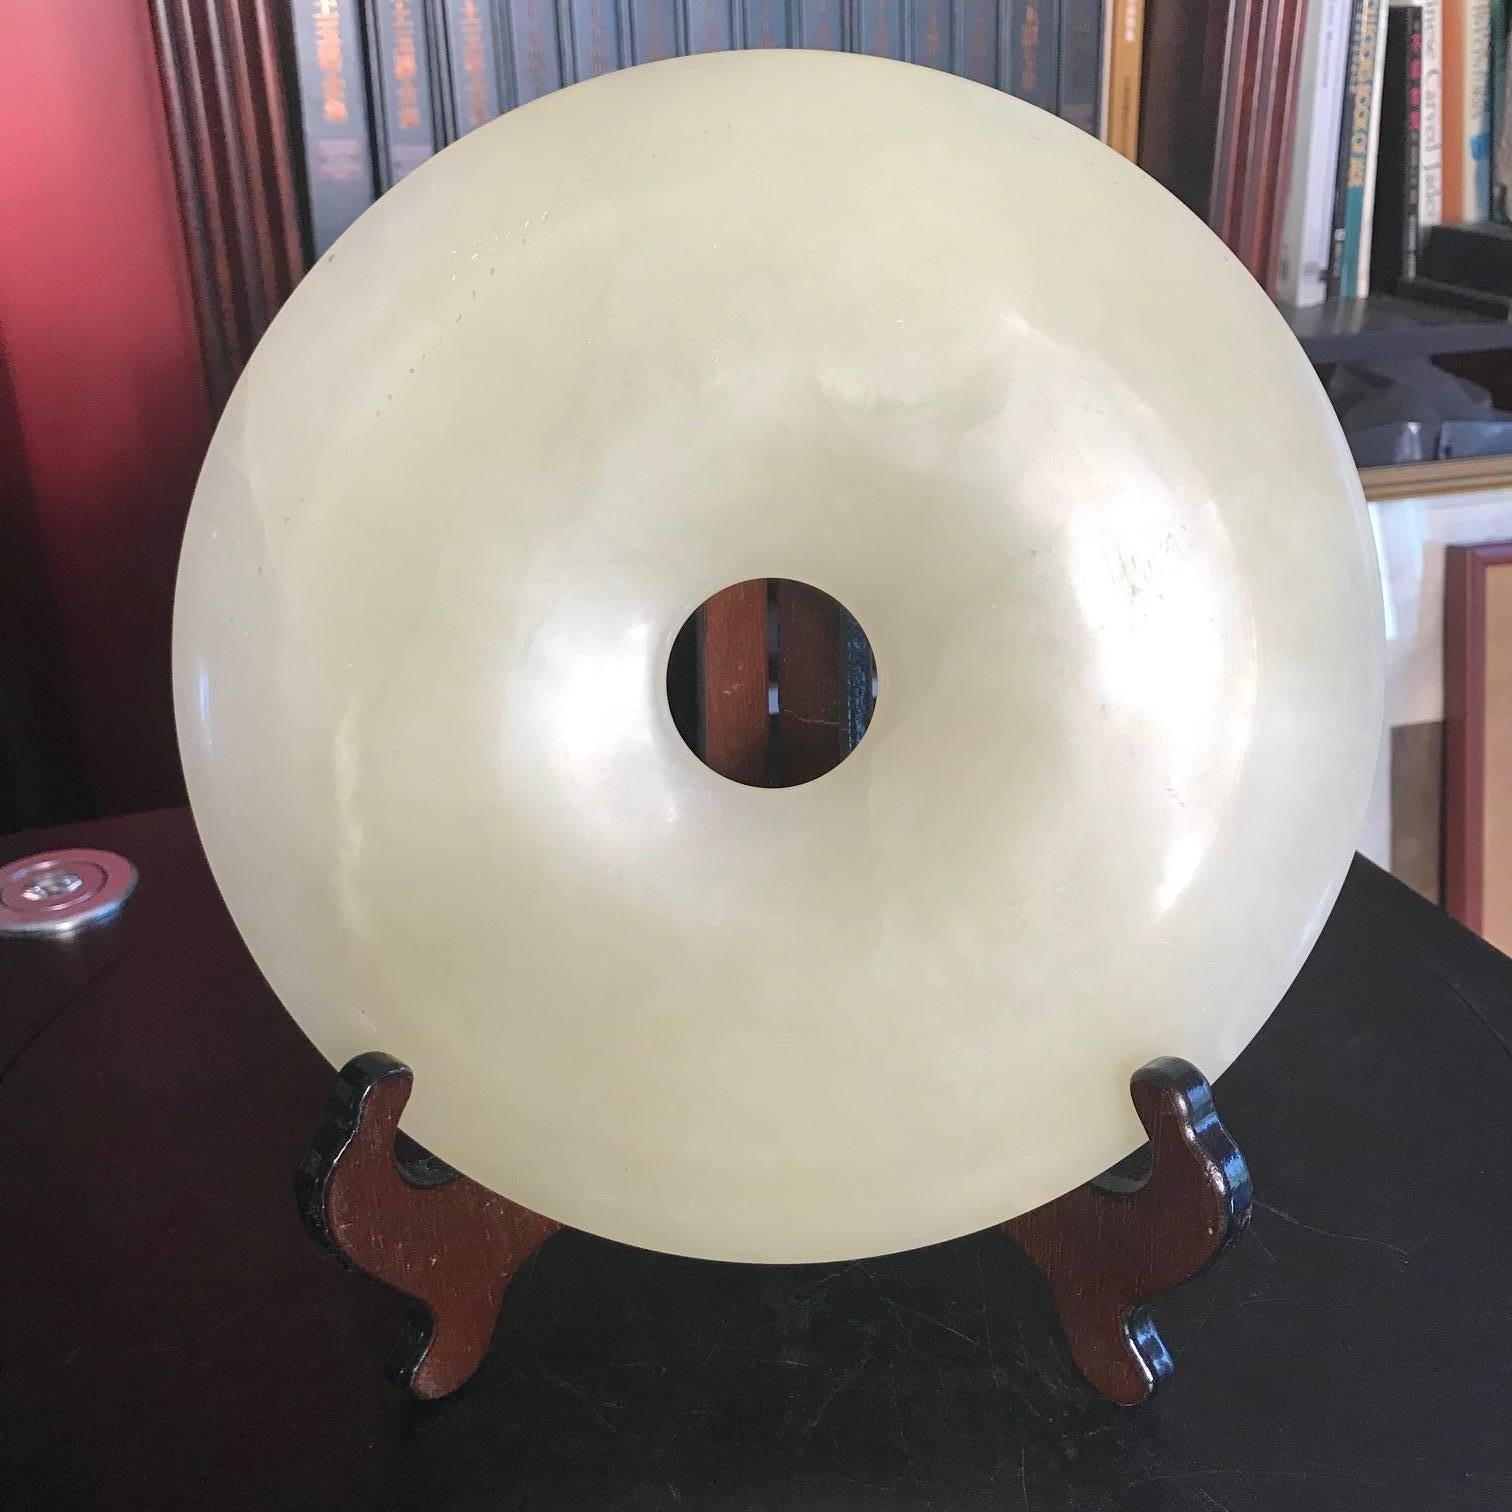 Here's another beautiful and unique way to accent your indoor or outdoor garden space with this treasure!

Our big 9 inch diameter jade stone garden bi was developed for our clients who love brilliant color, universal form, and want something unique